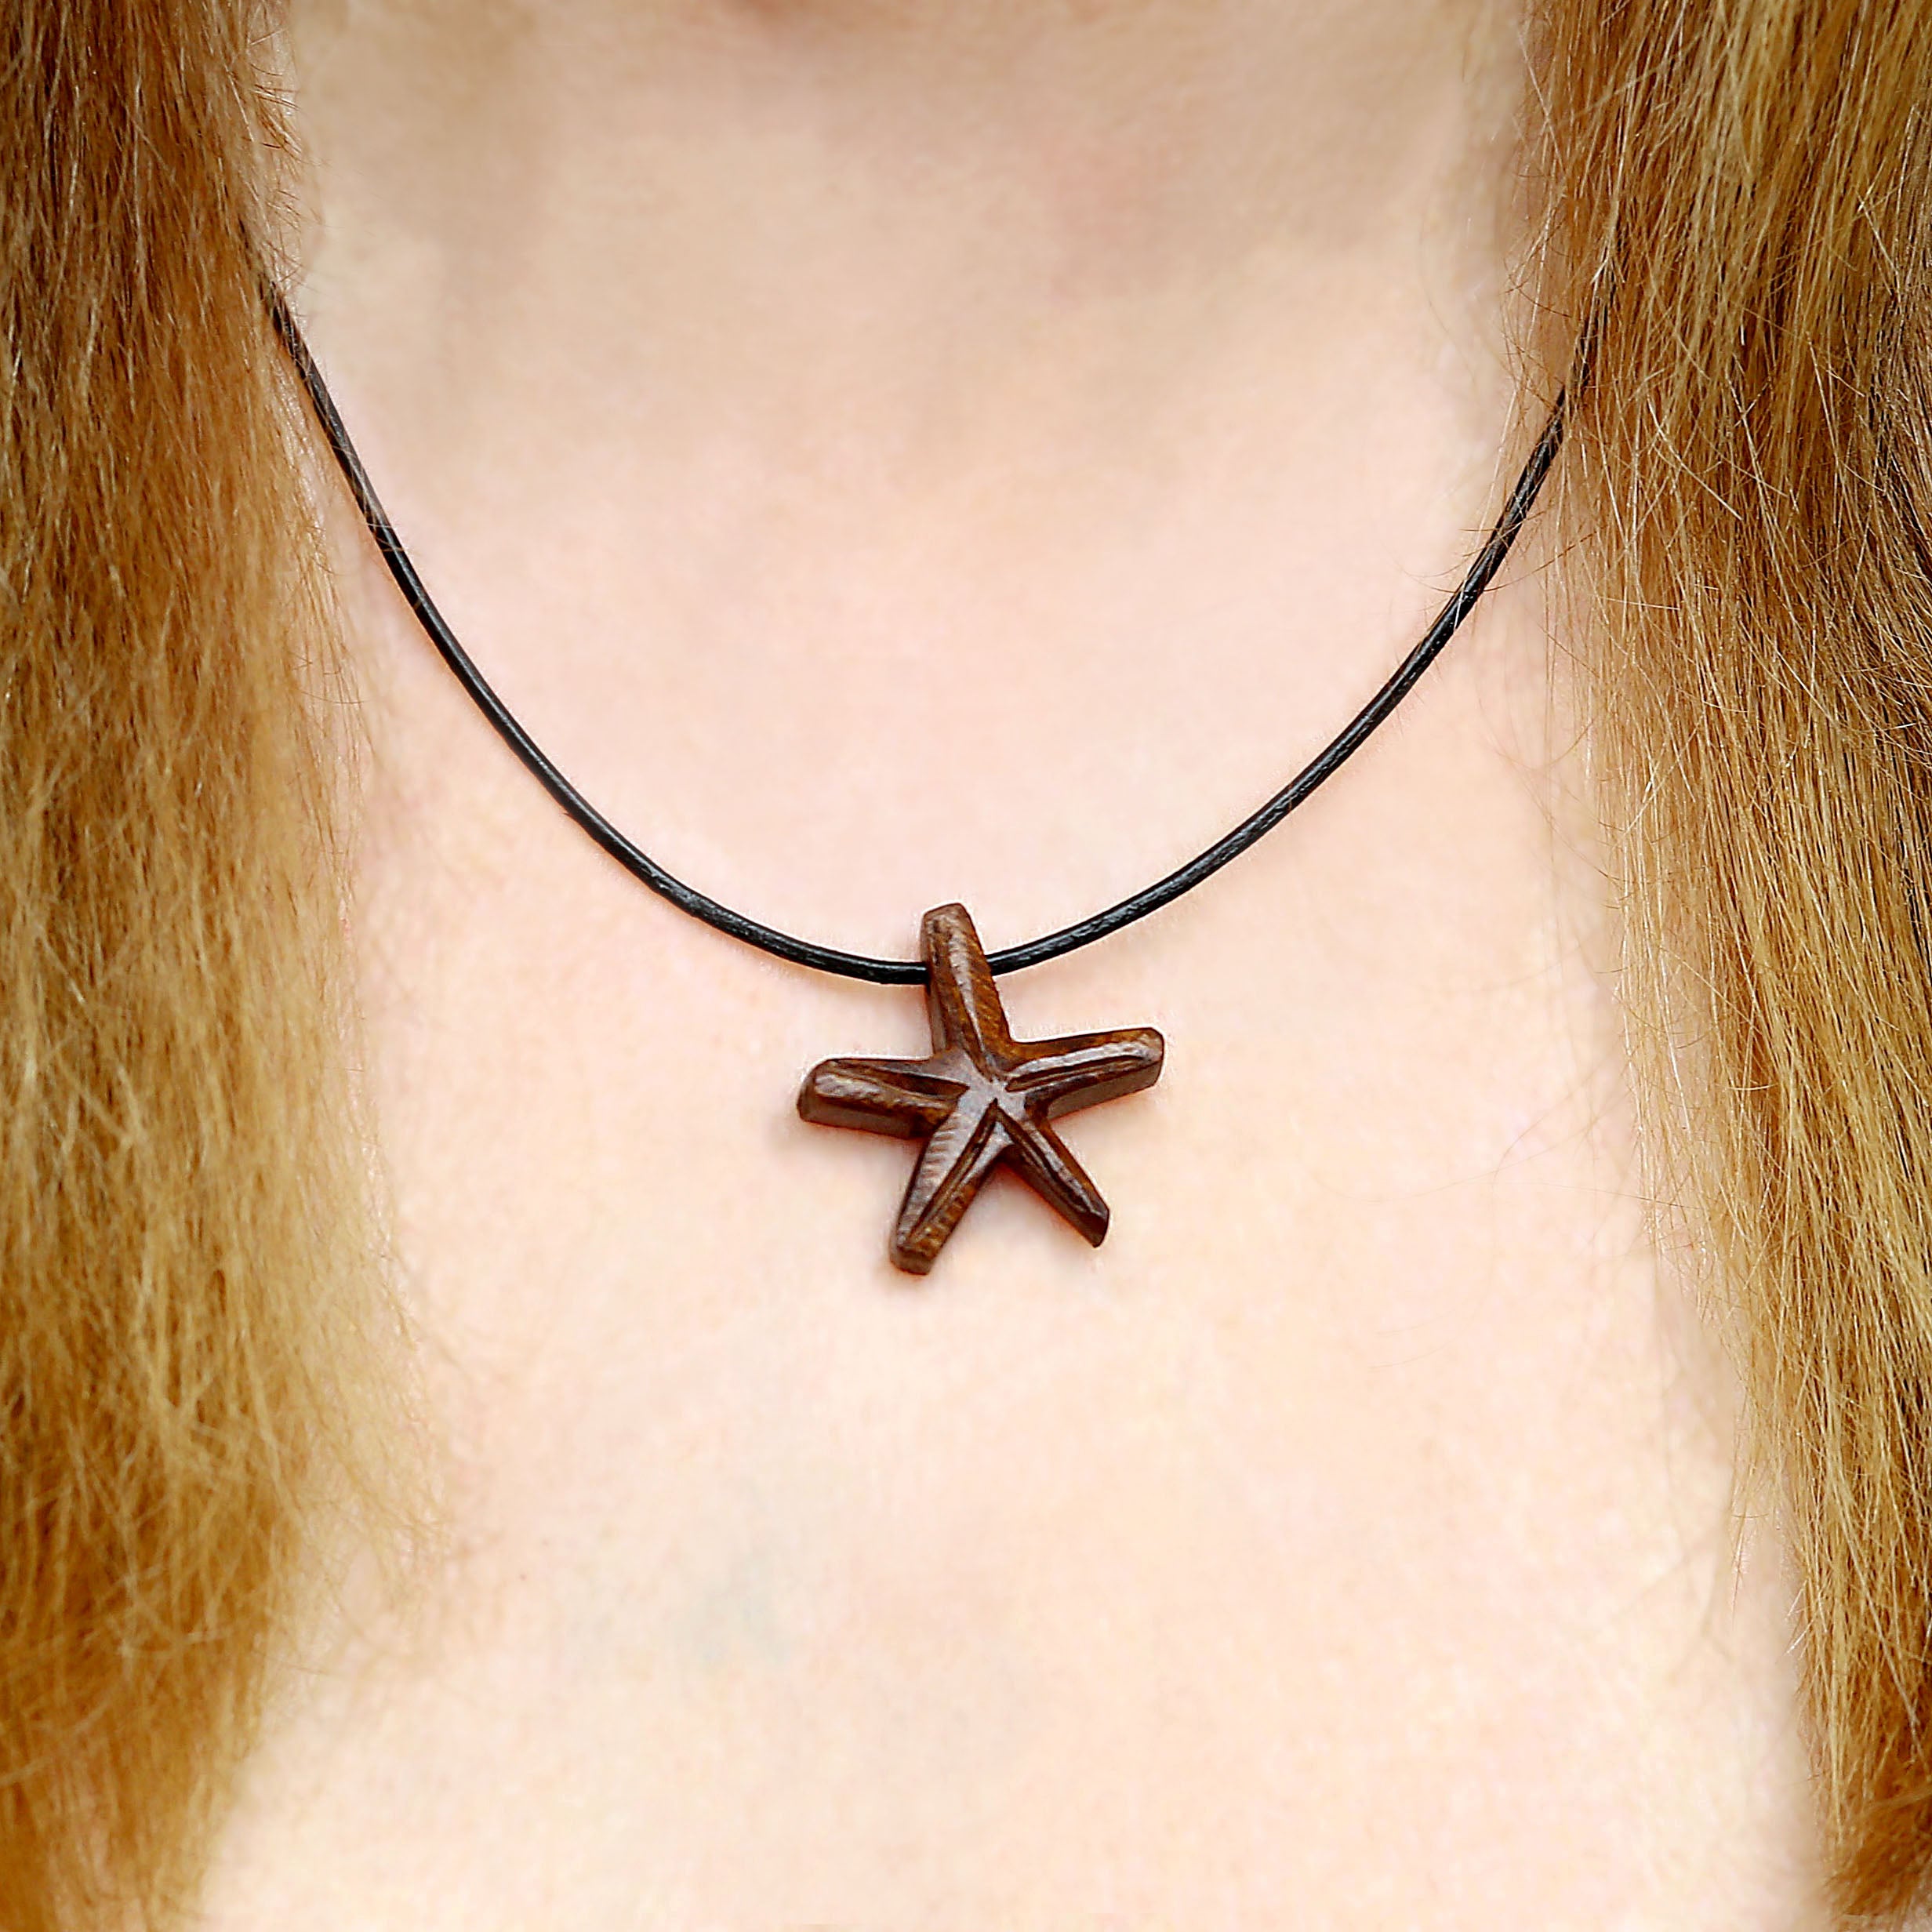 Hand wood necklace with starfish, fish, turtle orhorseshoe pendant made in sustainable jewelry,  Carved ironwood necklace, Exotic wood